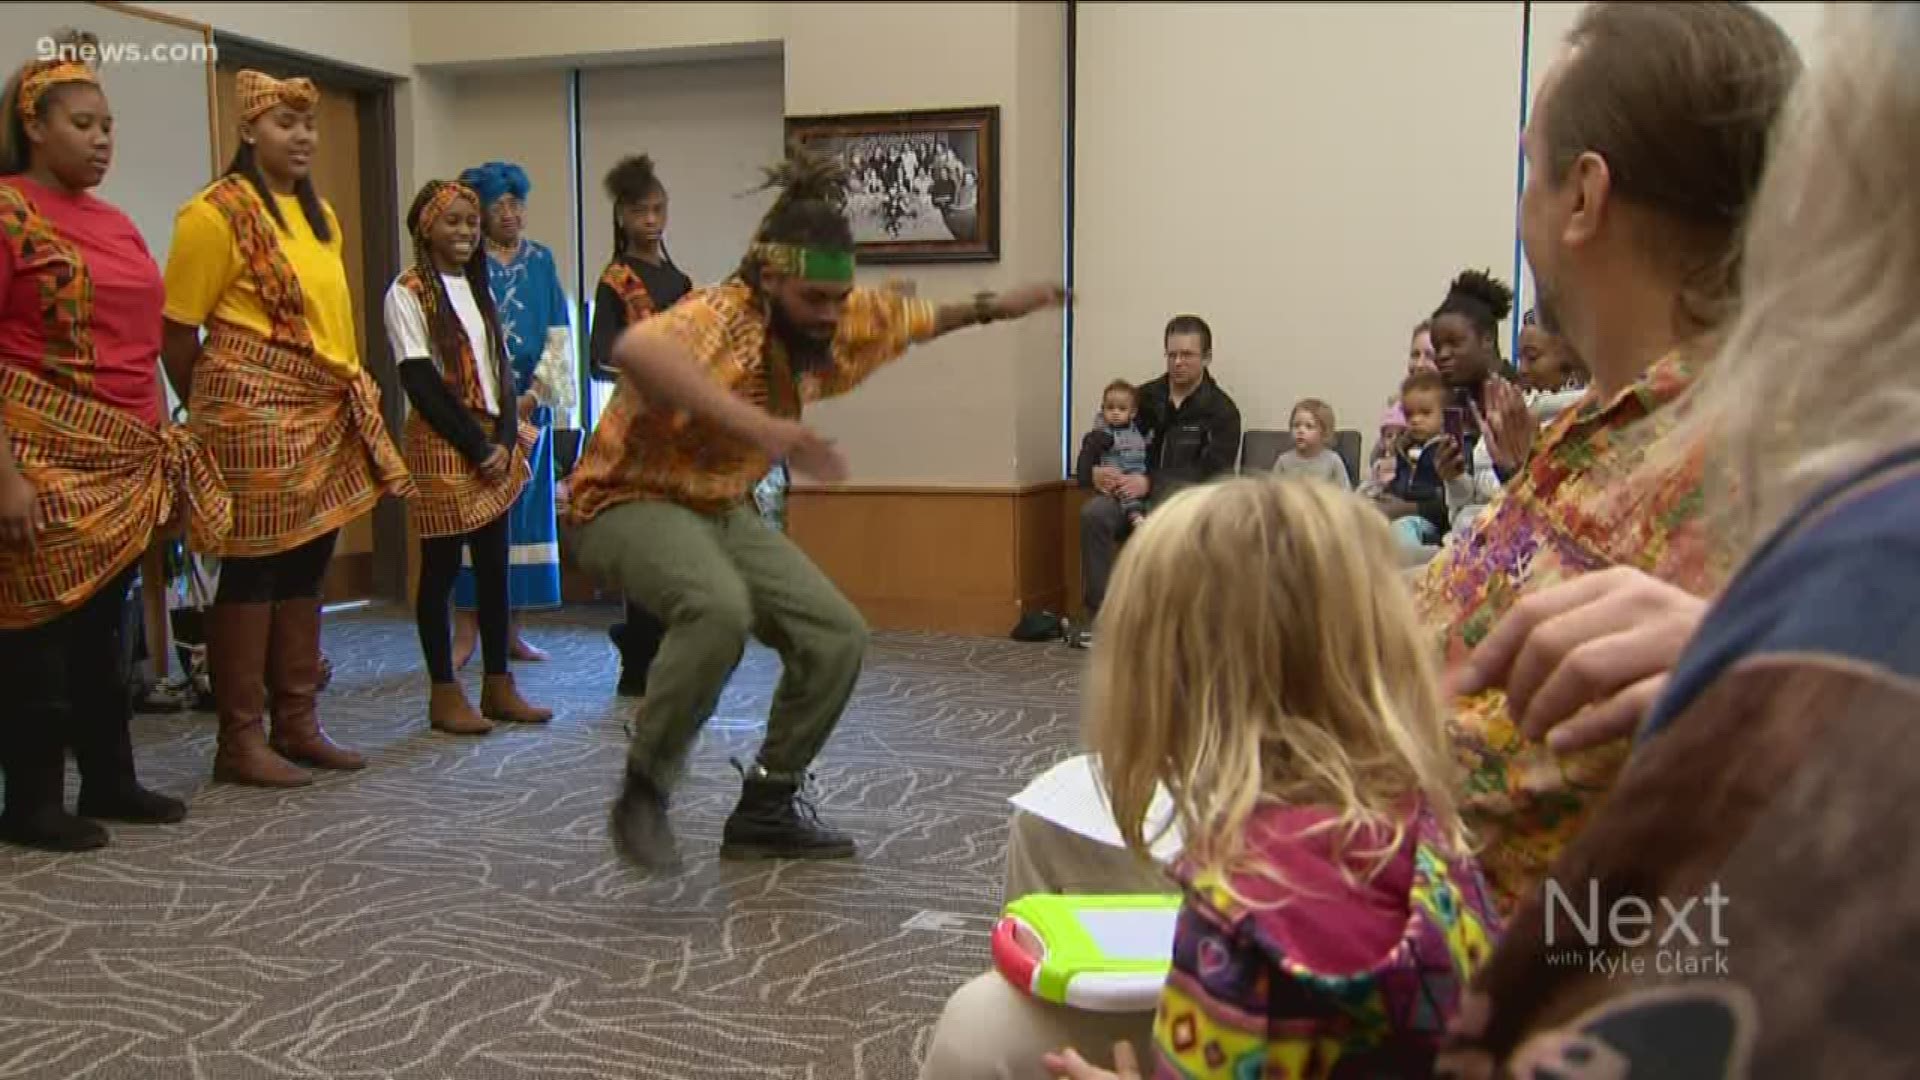 Boots stomped the ground, hands smacked drums, and smiles filled faces Thursday morning at the Blair-Caldwell African American Research Library in Denver.